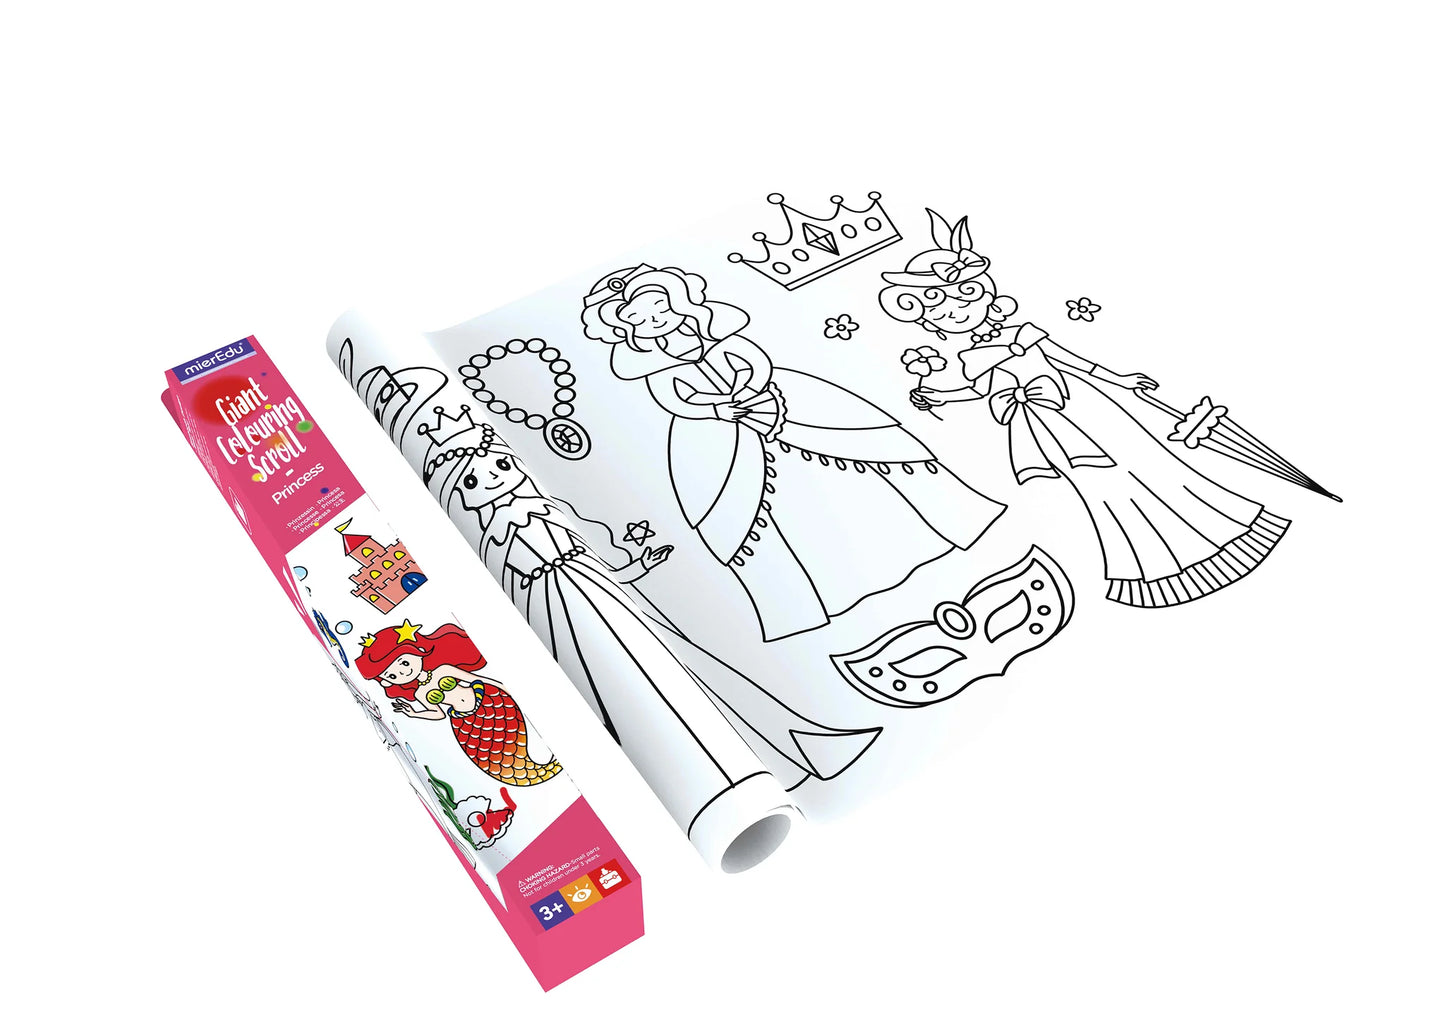 Giant Colouring Scroll - Princess